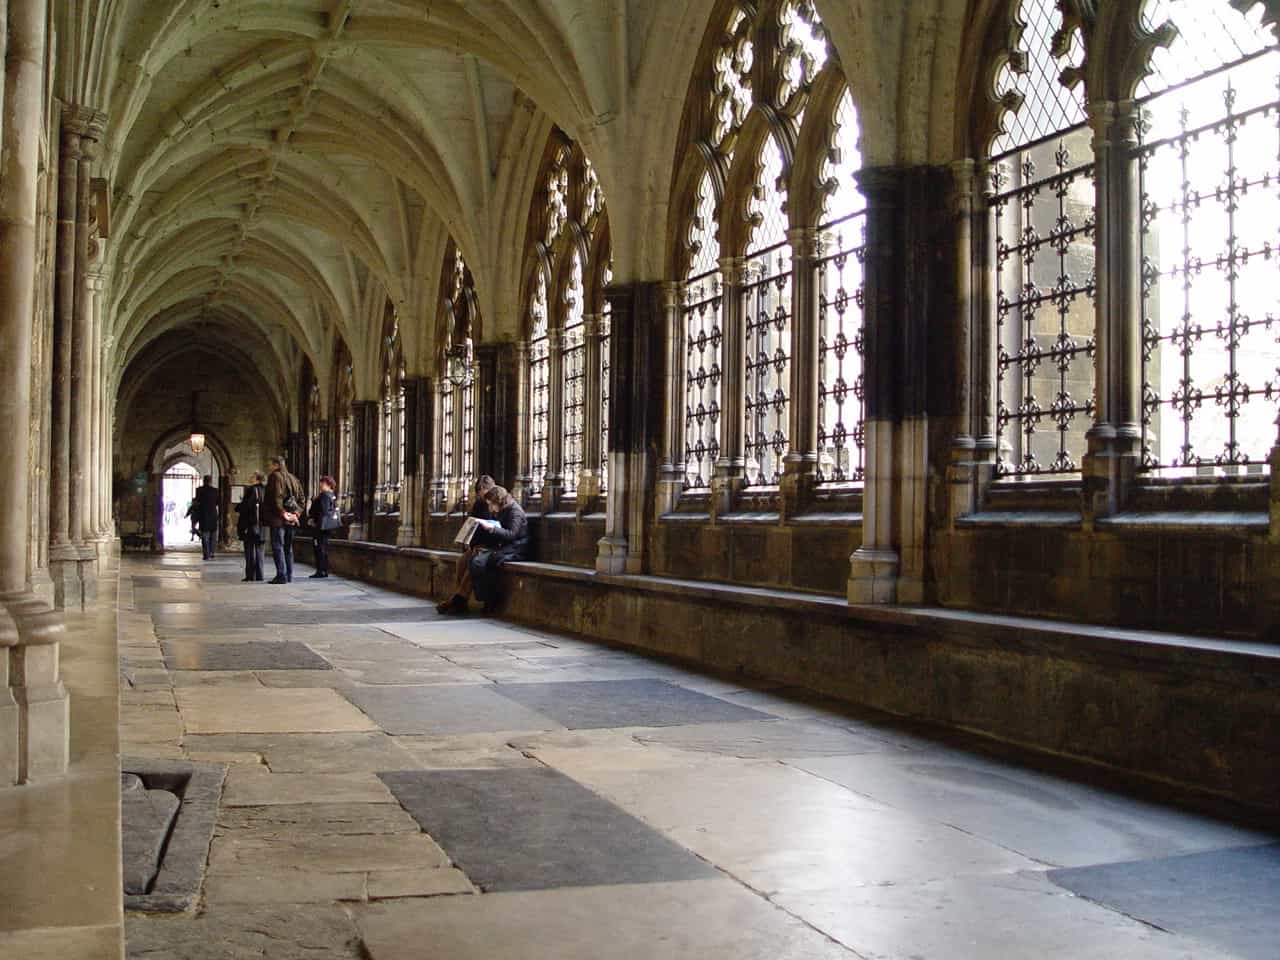 Cloister at Westminster Abbey in London, England